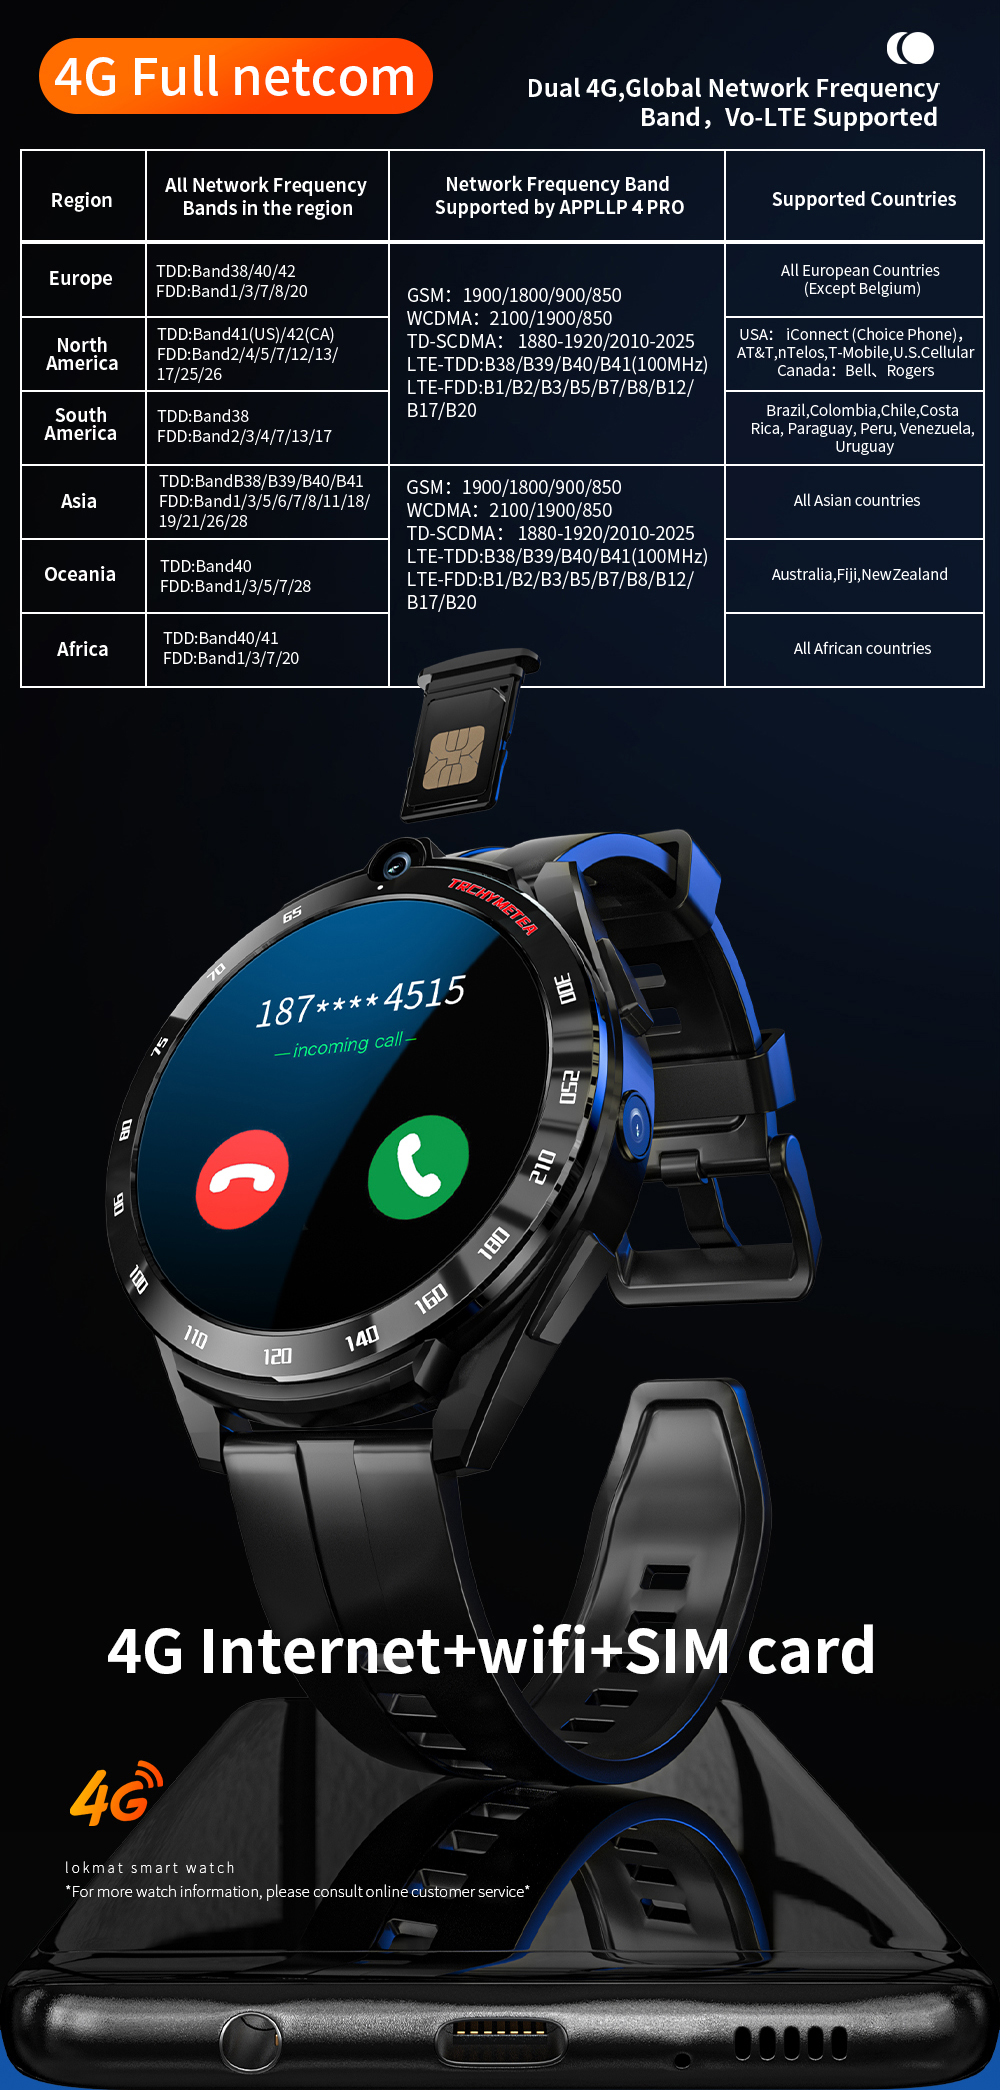 [Dual Mode Dual Chip] LOKMAT APPLLP 4 Pro 1.6 inch 400*400px Screen Octa-core 6G+128G Android Smartwatch SIM Card WiFi Dual Cameras GPS Positioning Newest Android 11 System 4G LTE Smart Watch Phone